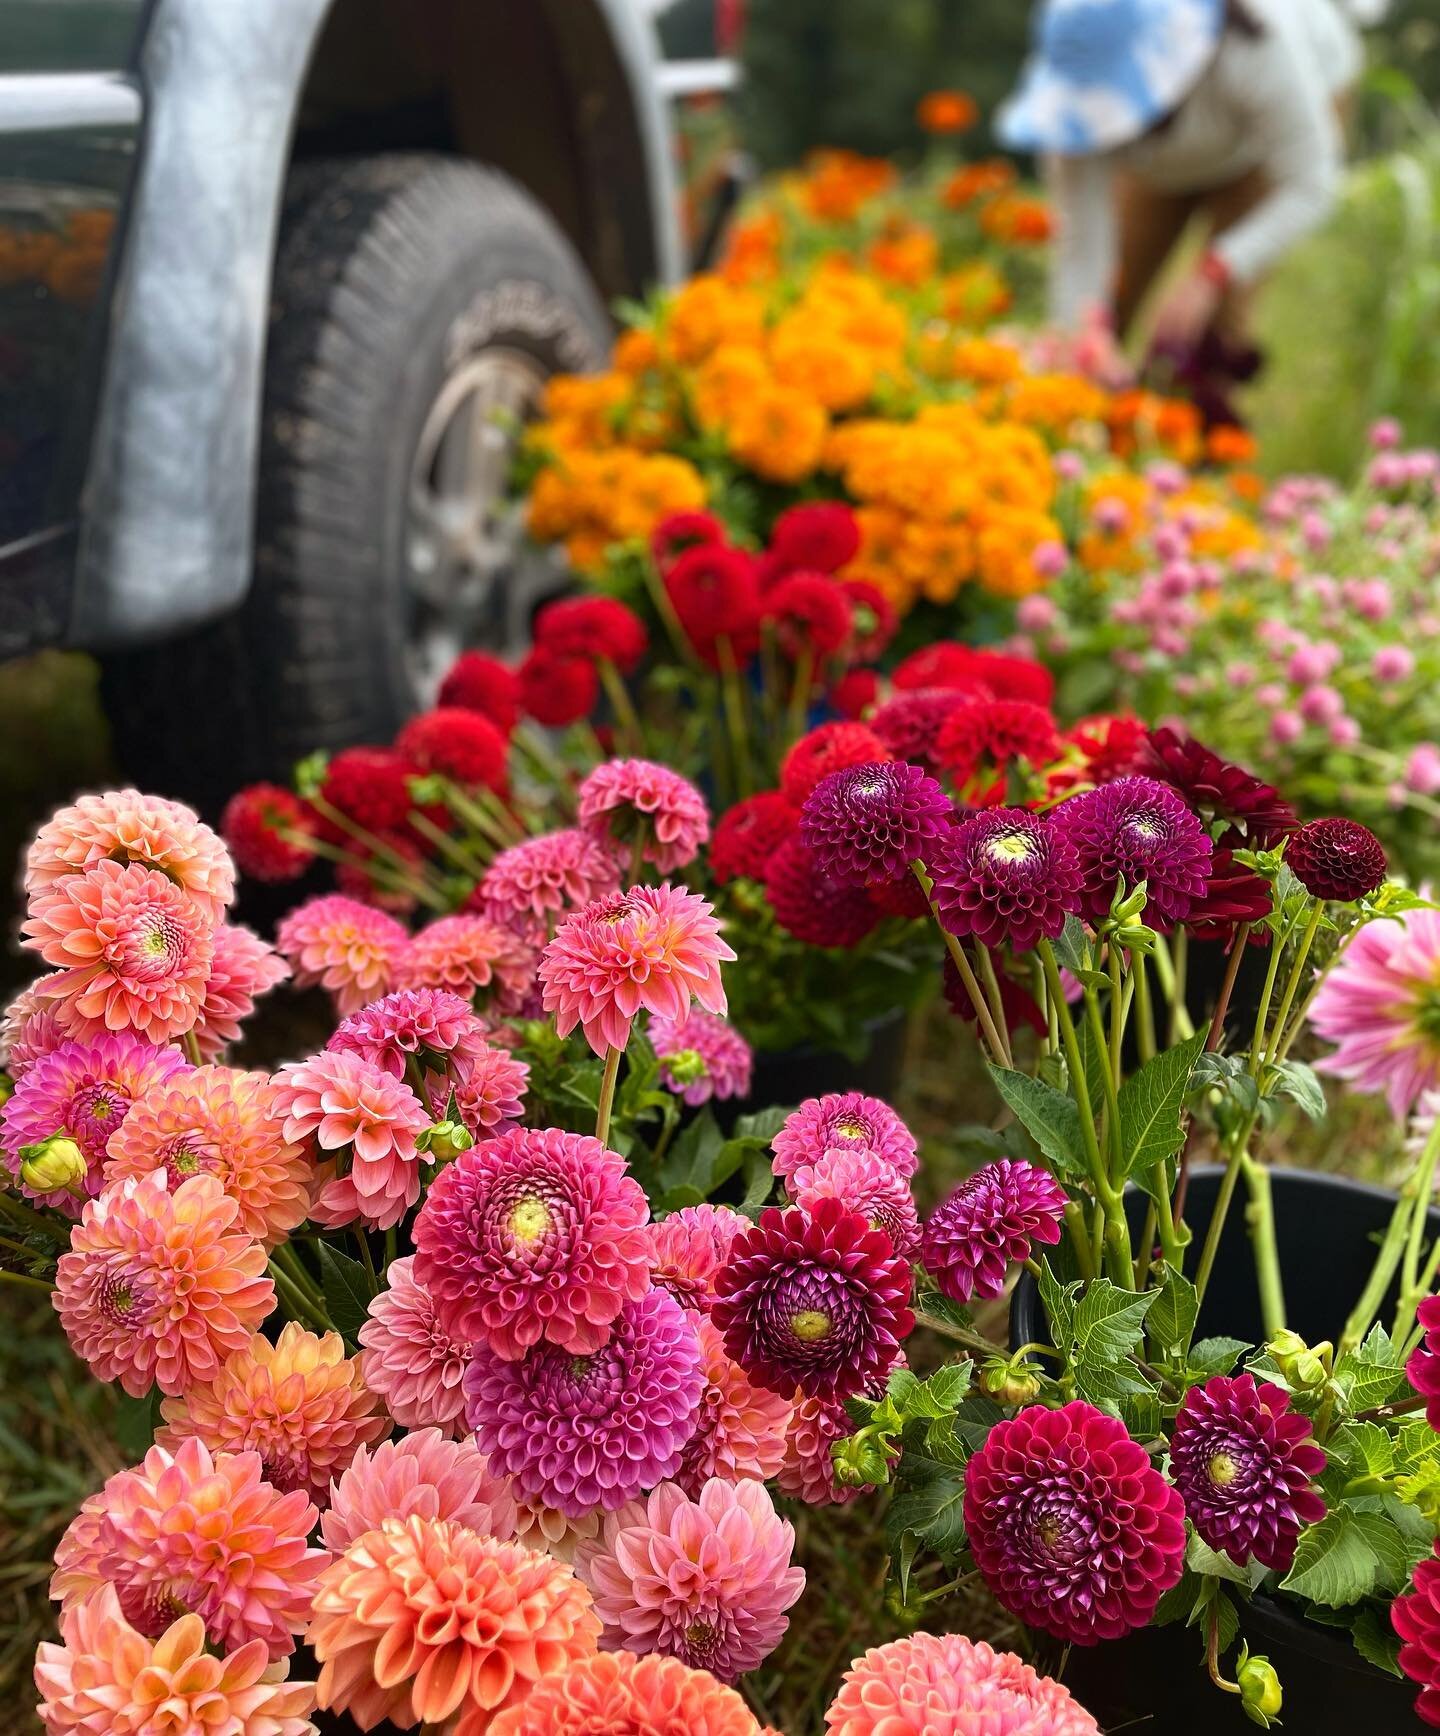 We finally got much-needed rain but also hail the size of gumdrops. We pruned back the dahlias this morning to promote fresh growth for a busy week ahead, onward and upward! 

#flowerfarmer #localflowers #dahlias